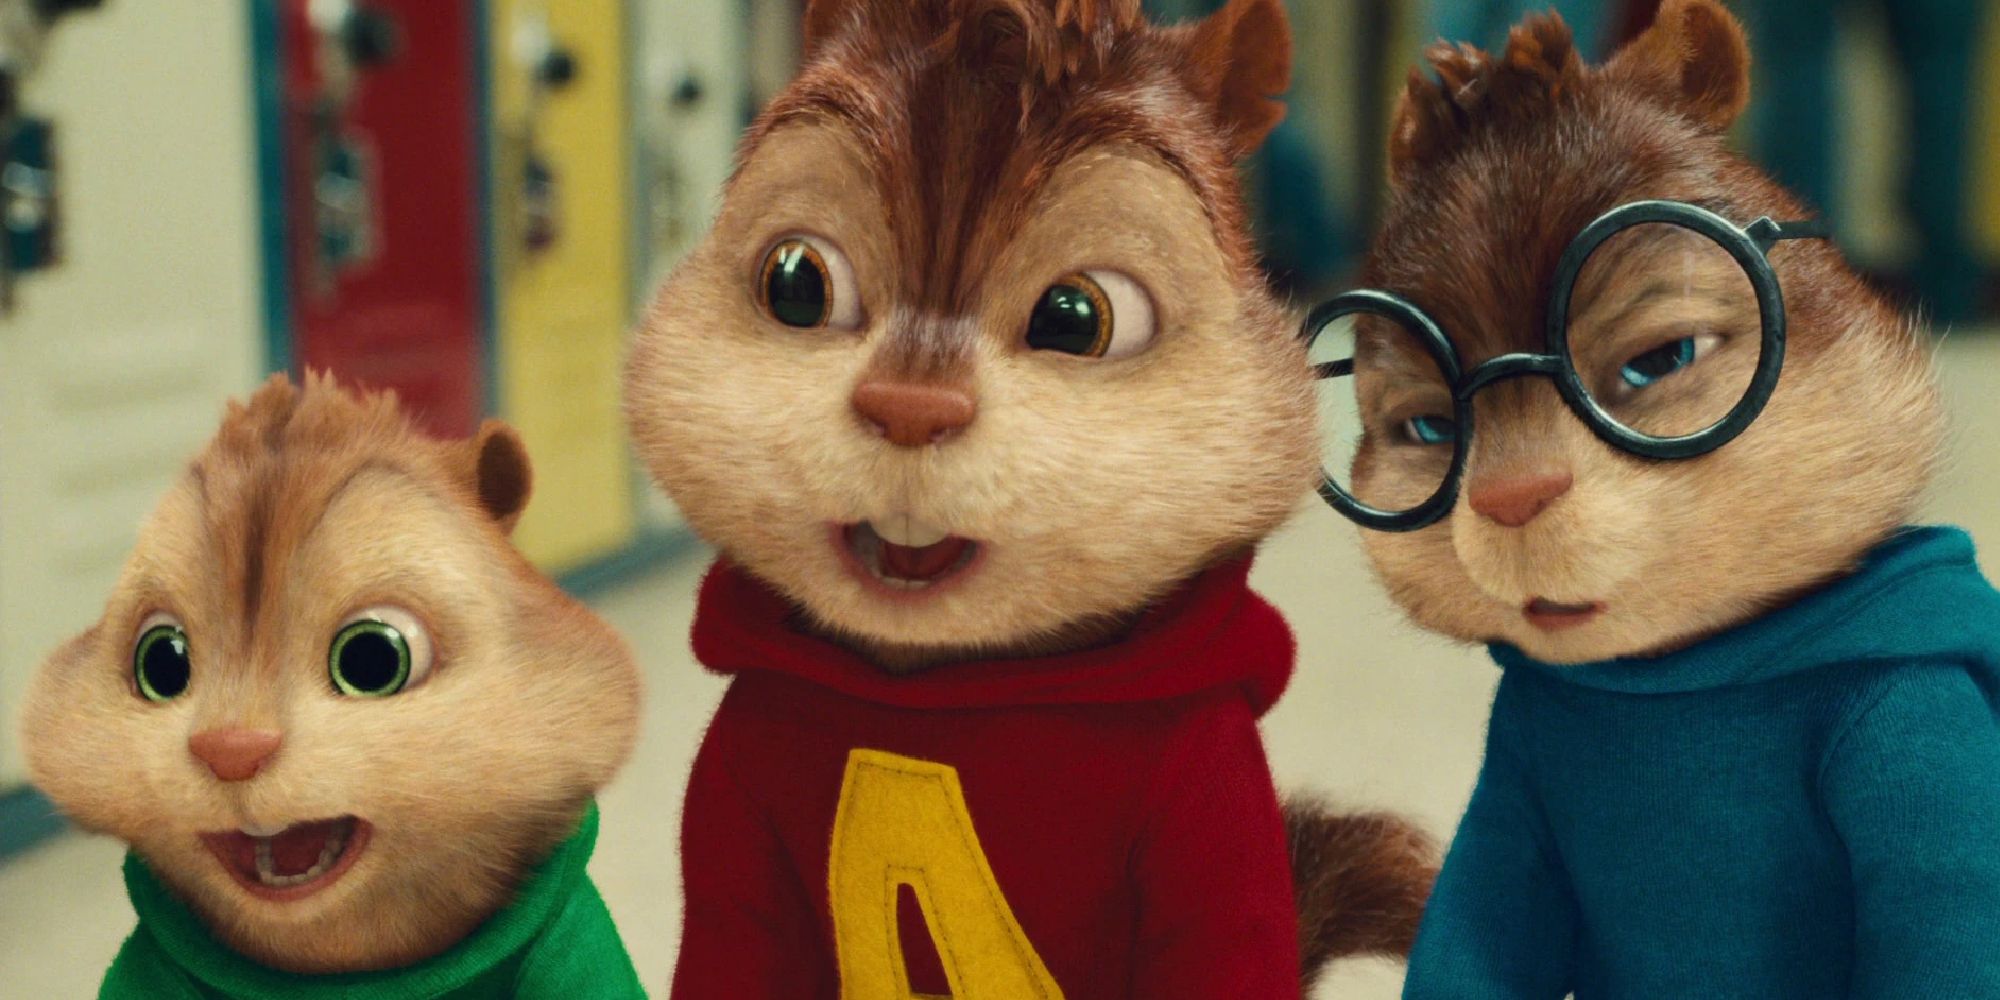 A close-up shot of the three chipmunks in Alvin and the Chipmunks: The Squeakquel.